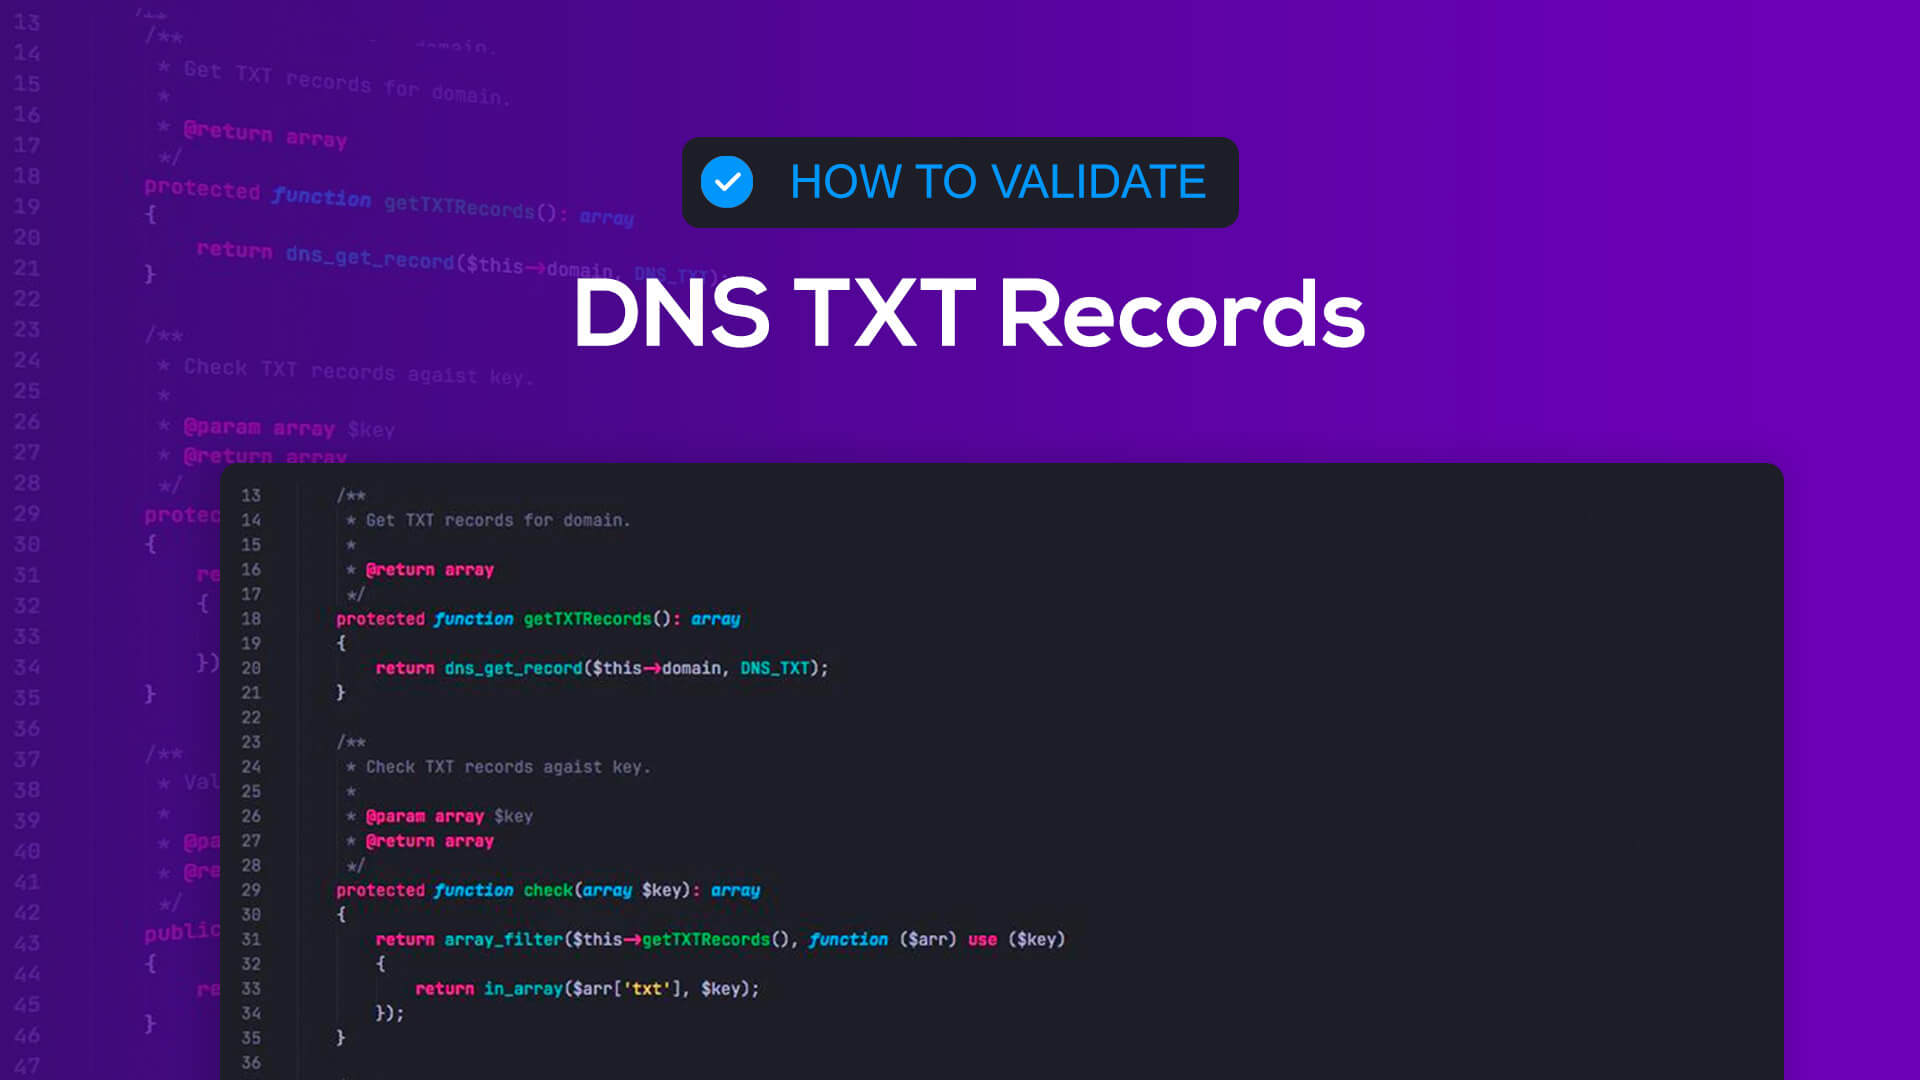 Let's validate some DNS TXT records. 👍